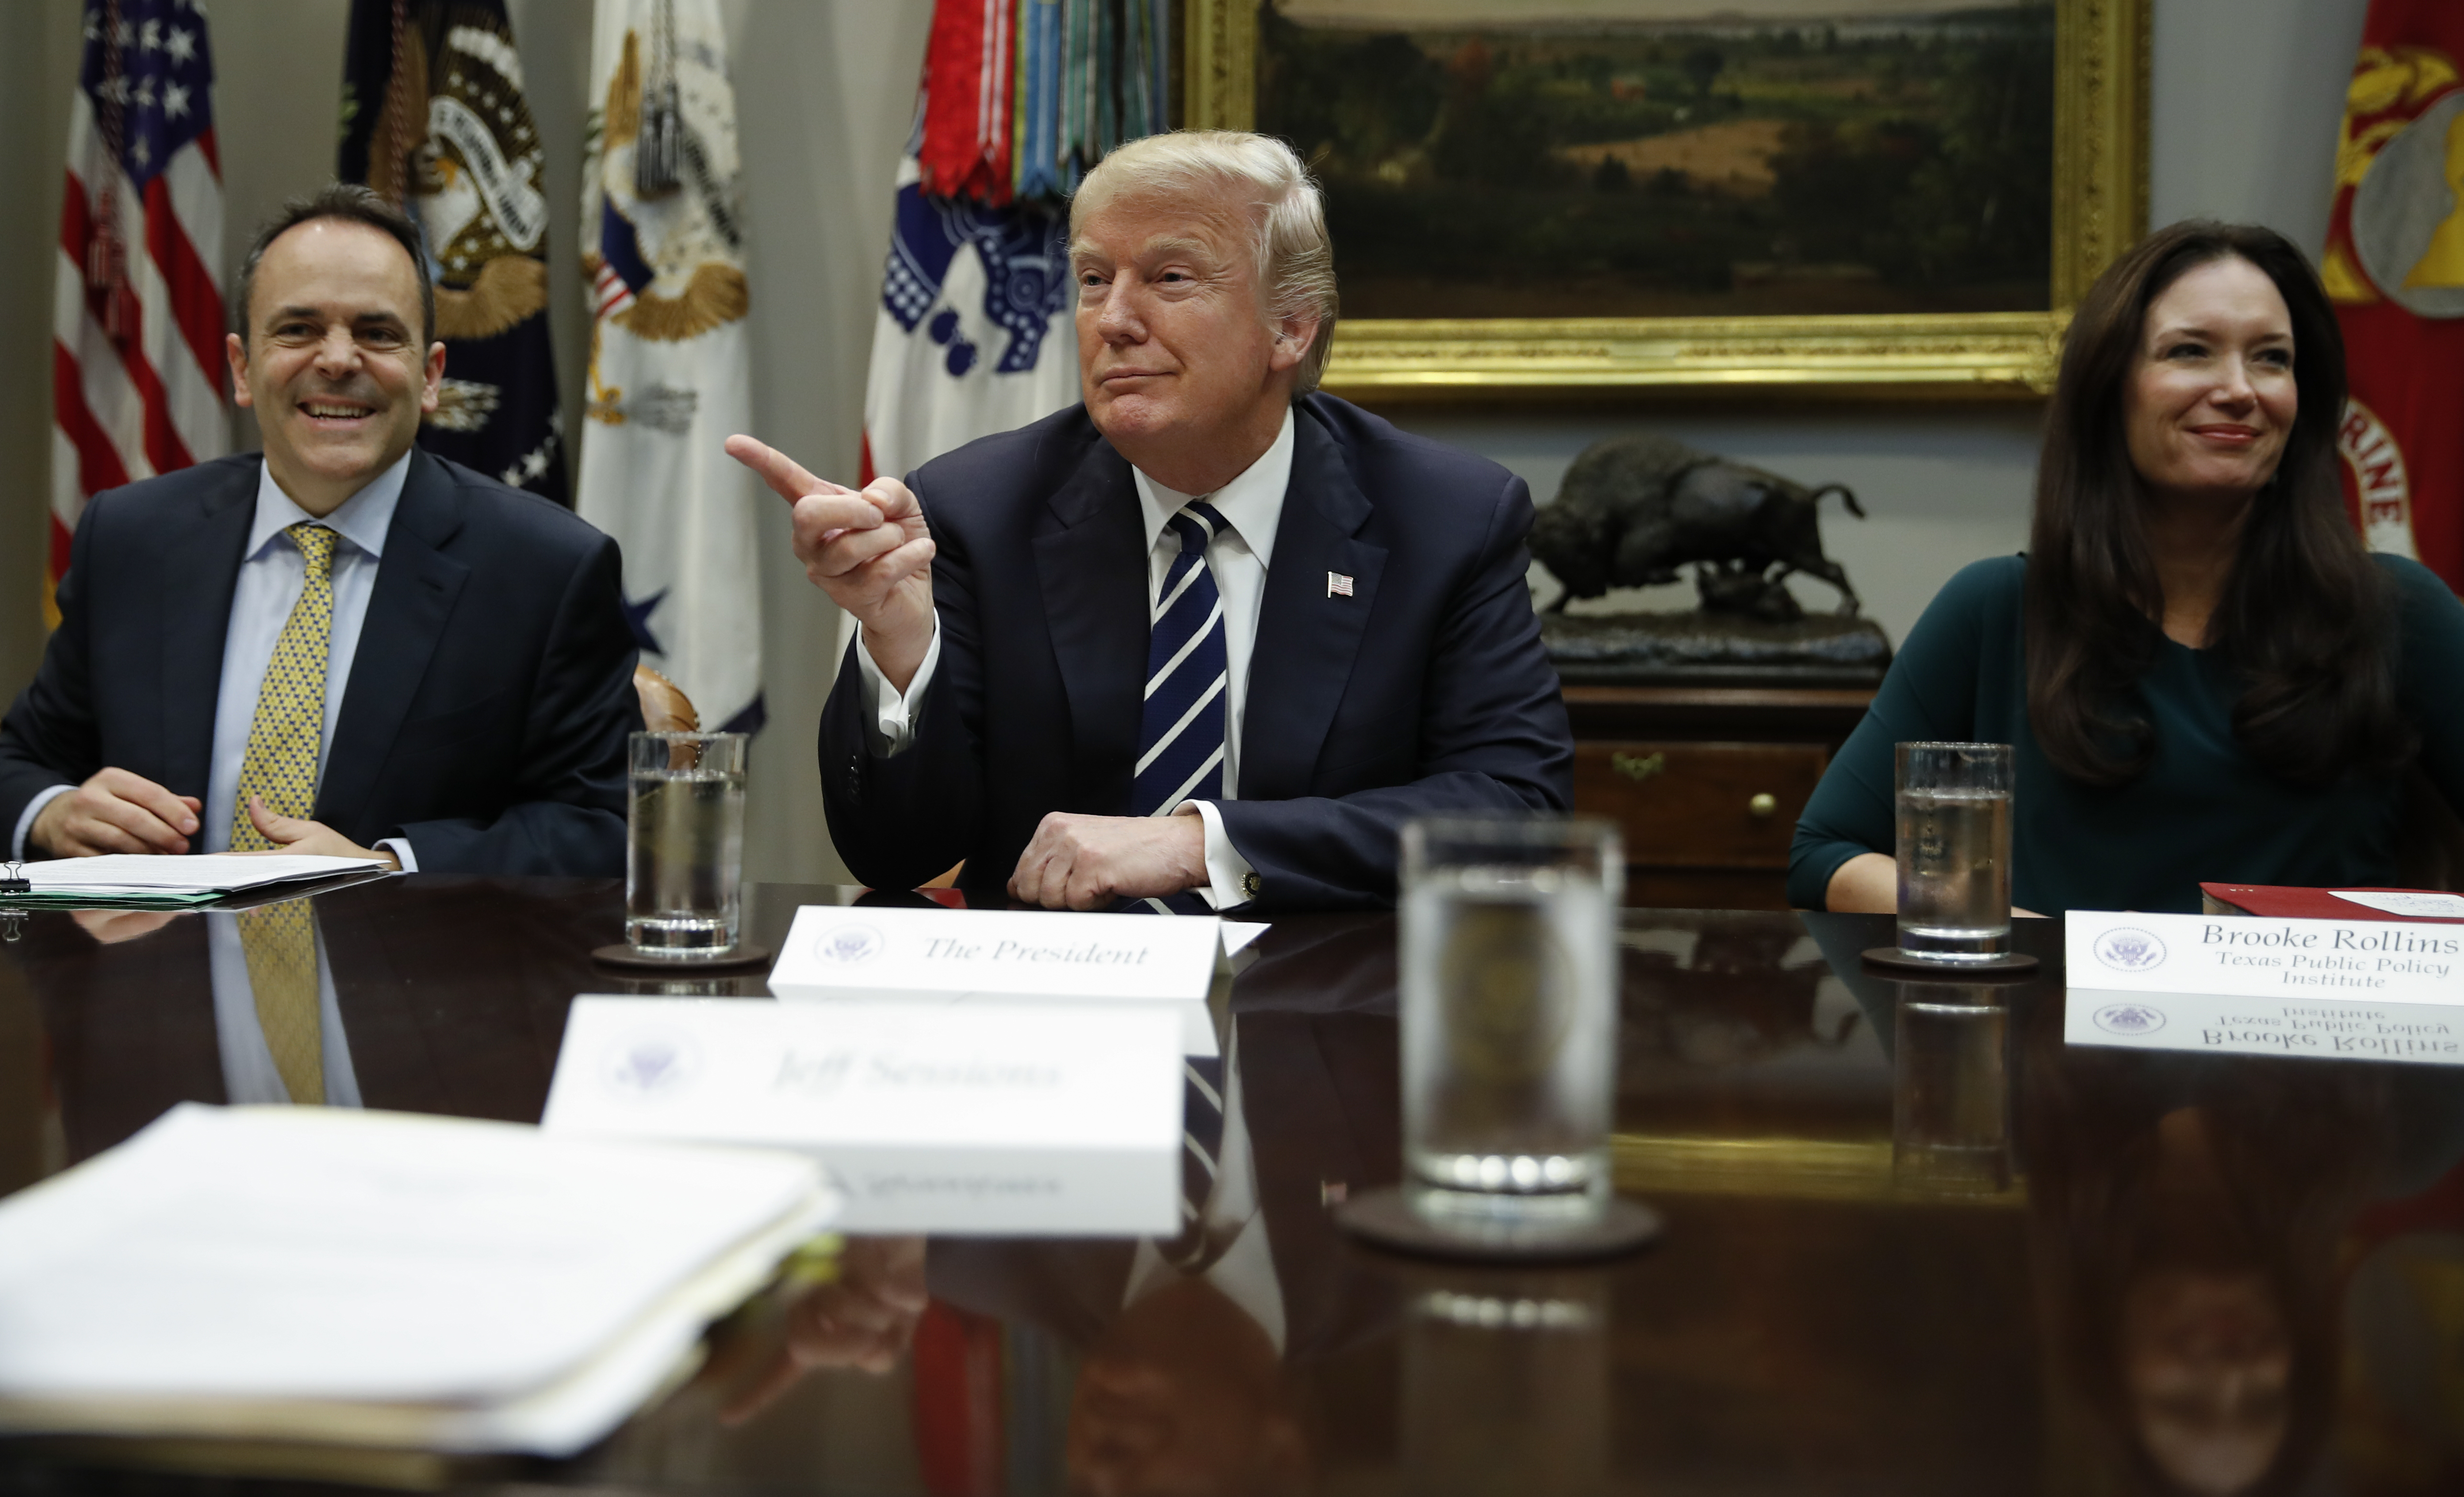 President Trump during a prison reform roundtable.